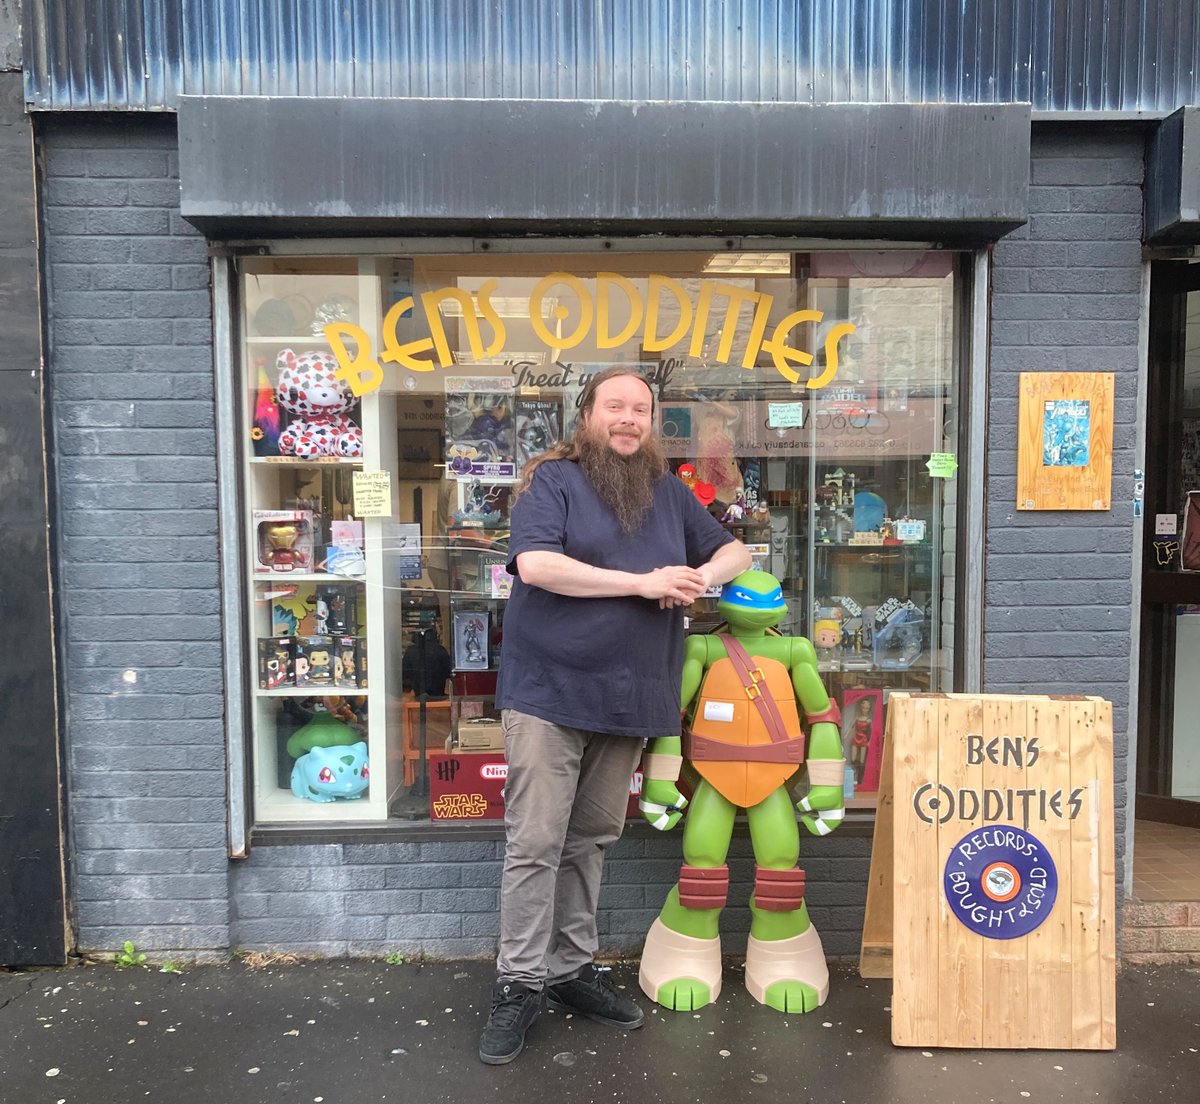 Did you know that #Burnley has its very own treasure trove? Ben's Oddities on Standish Street is an Aladdin's cave of collectibles, memorabilia, gifts, and much more from the worlds of cartoon, tv, and film. Every budget is catered for too. More here - facebook.com/bensoddities